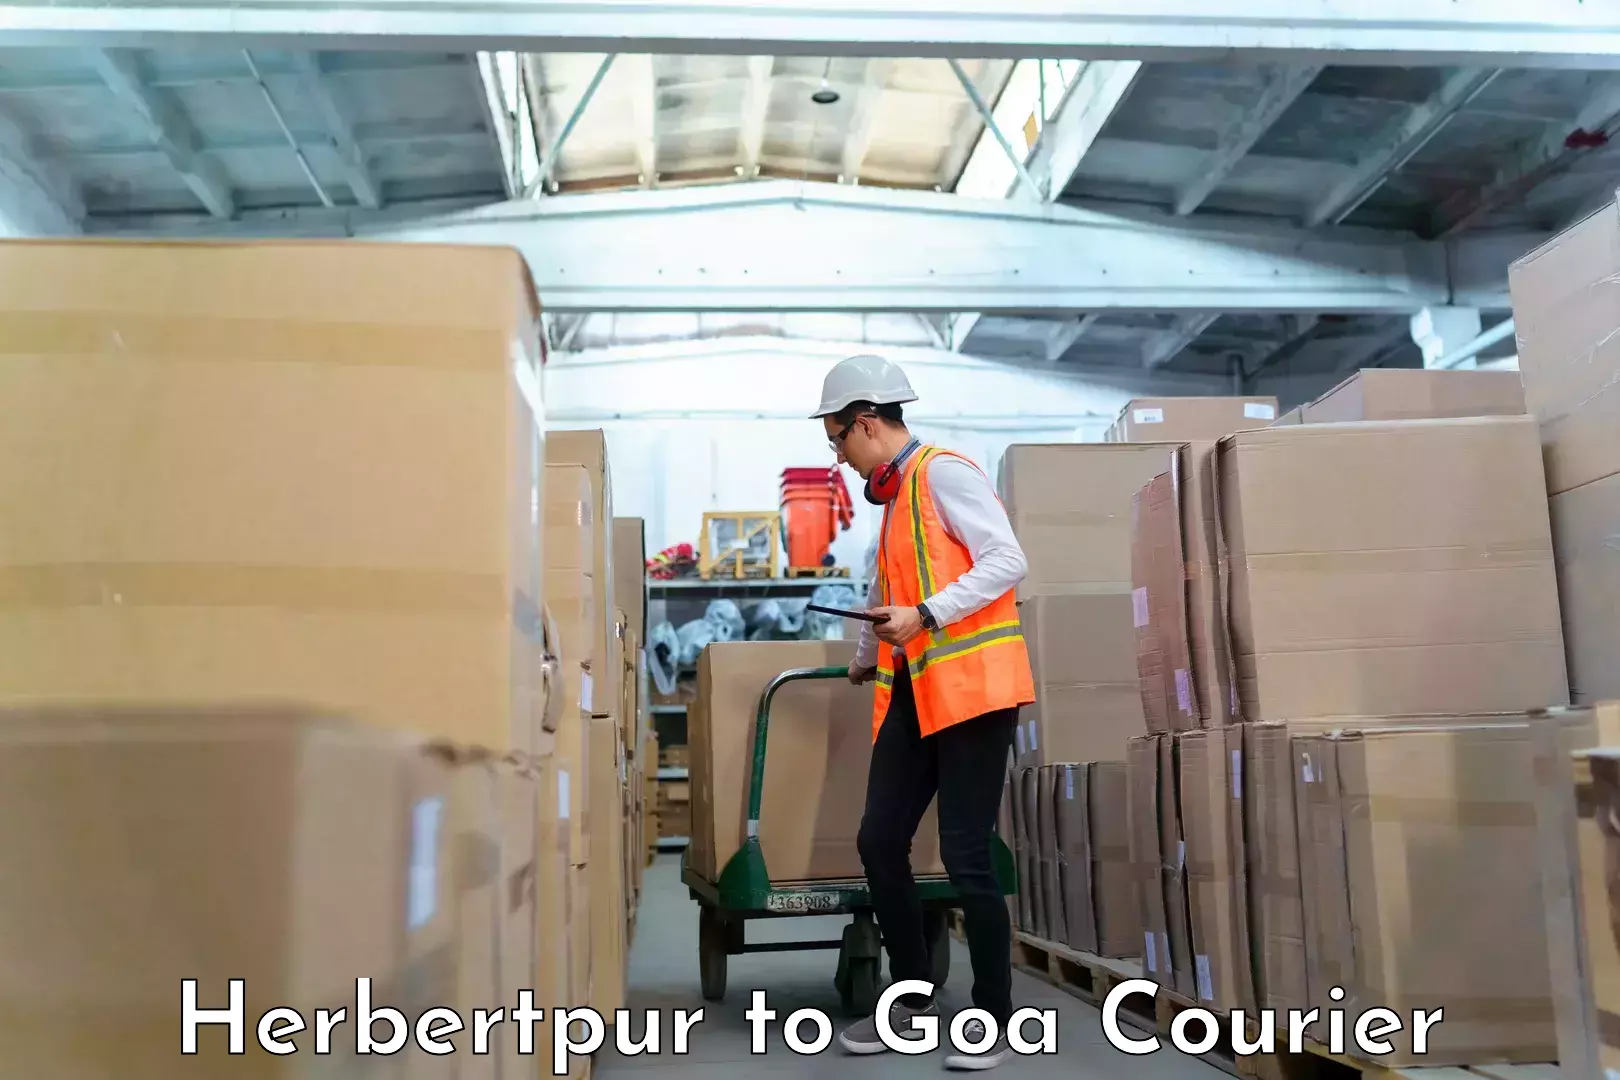 Luggage shipment specialists Herbertpur to Goa